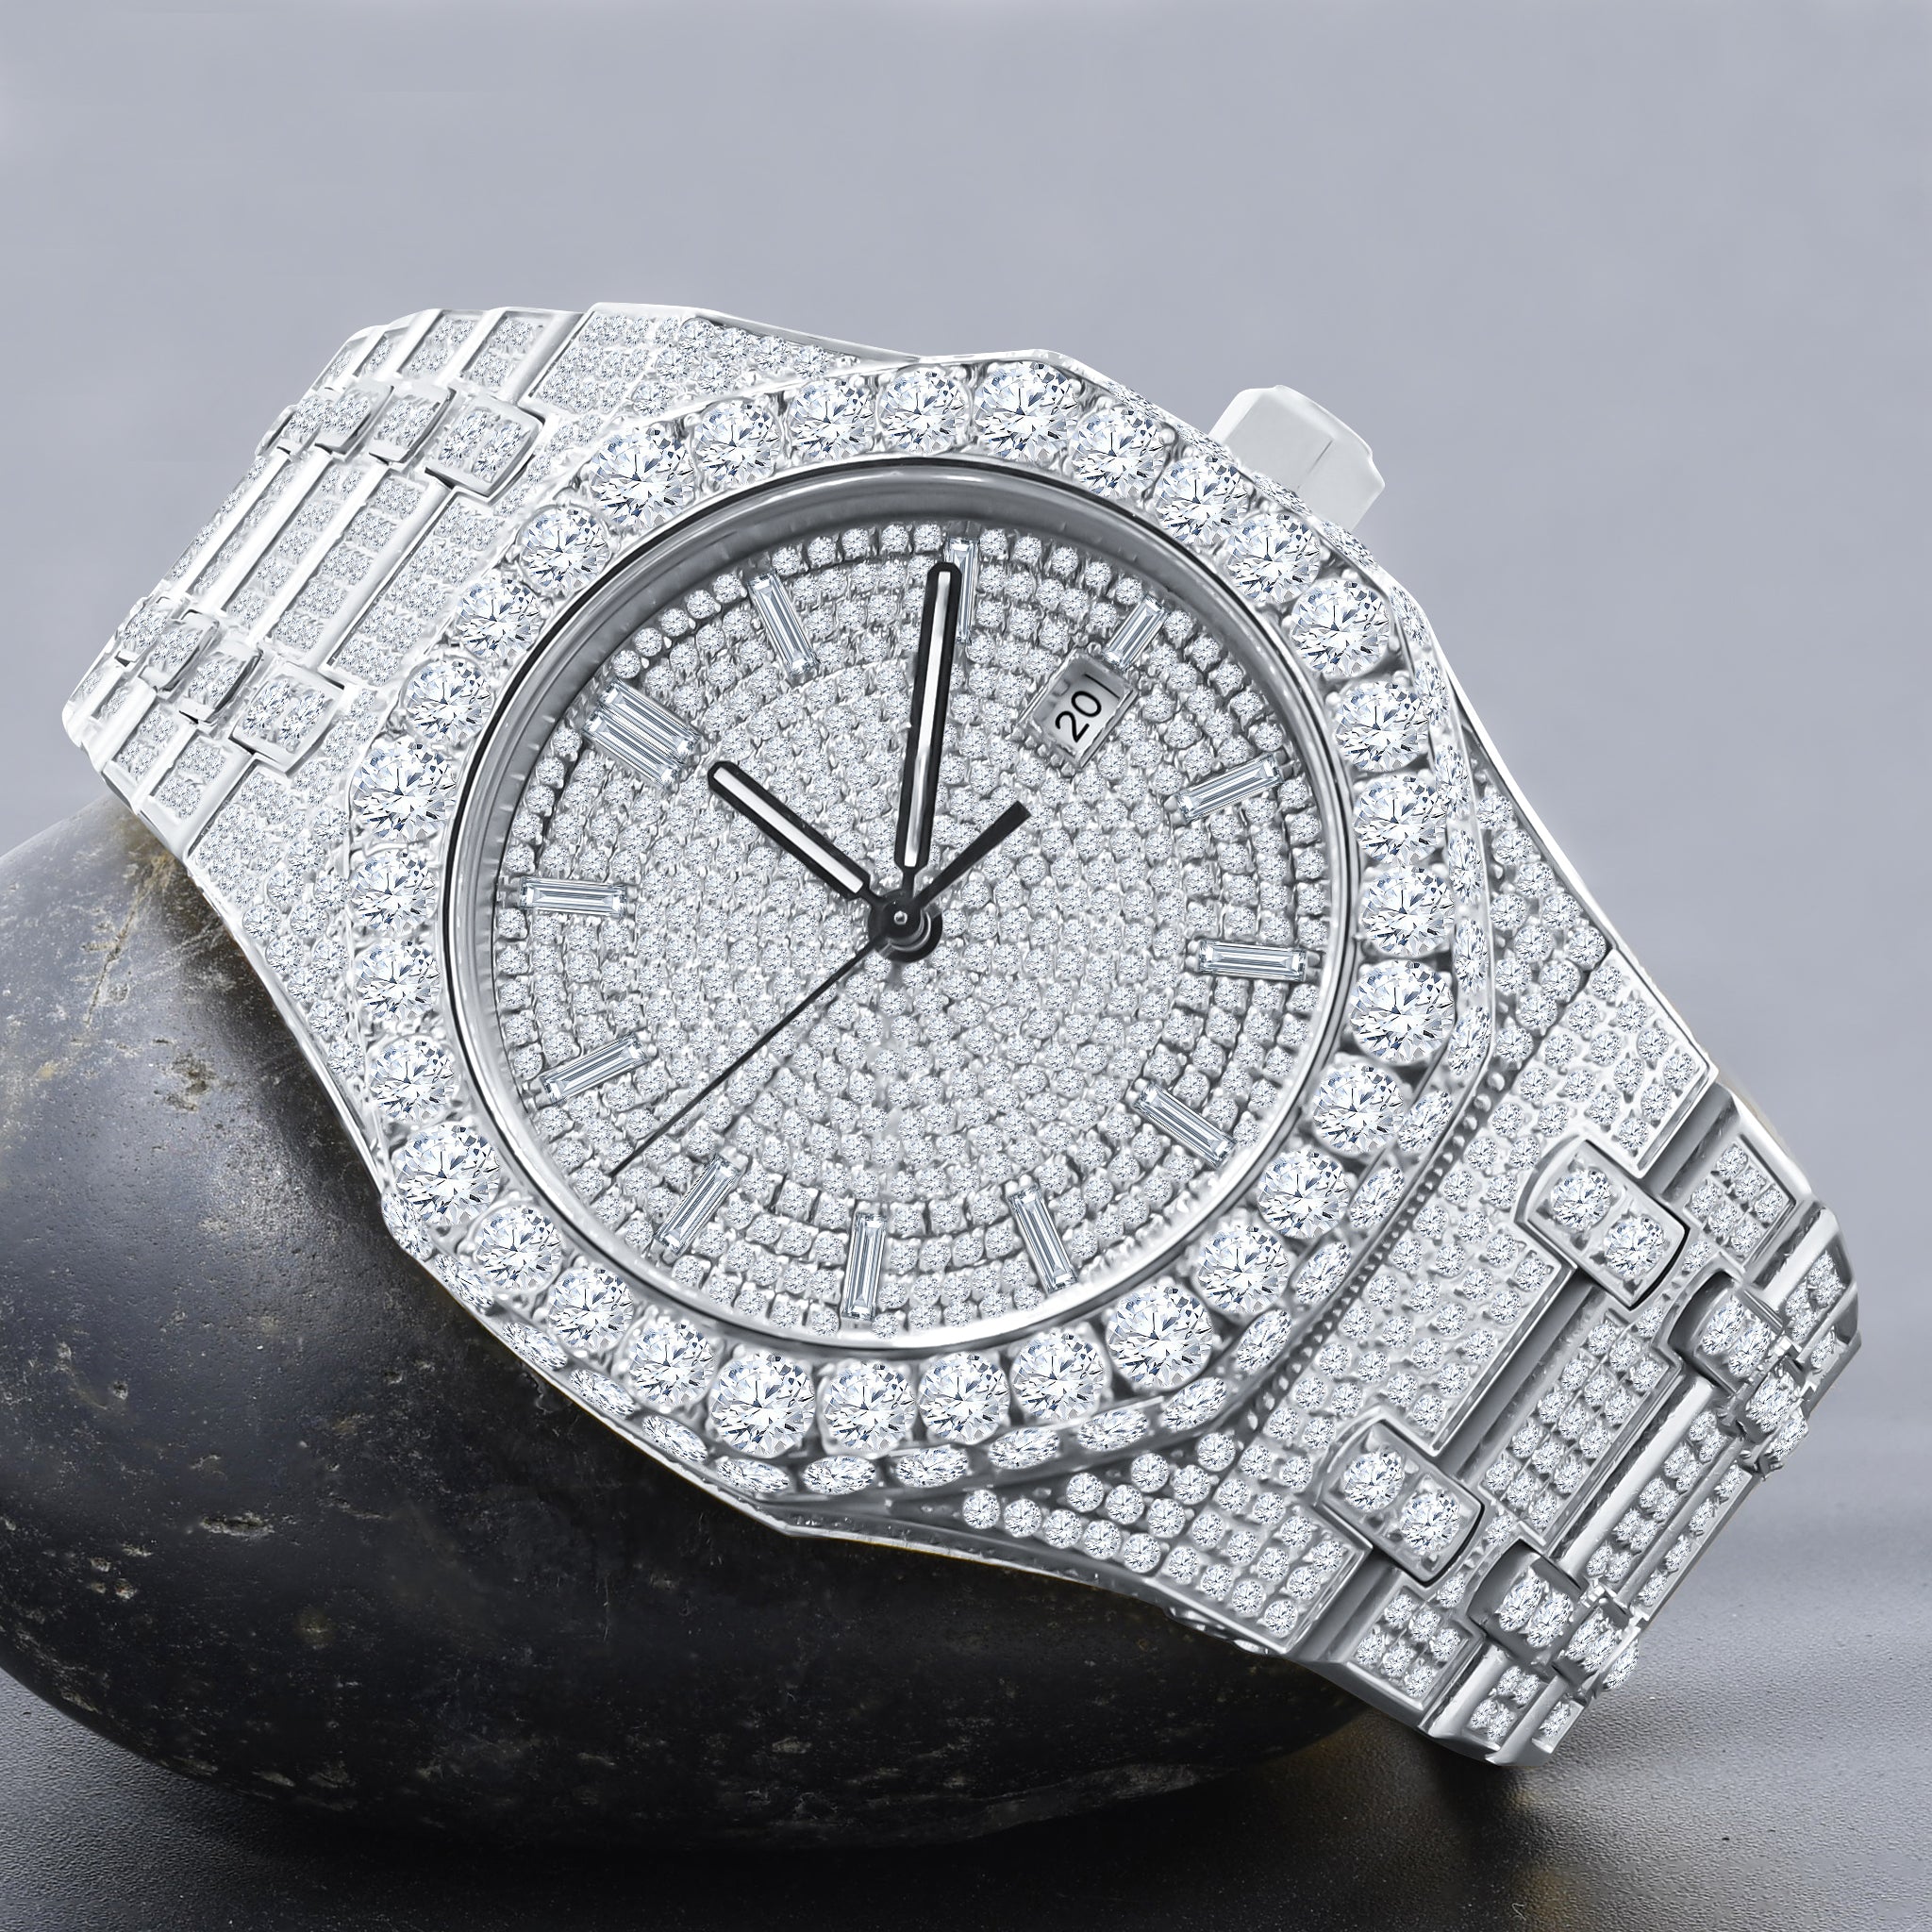 Concord x Van Cleef & Arpels Classic Watch - 20 81 218 | The RealReal